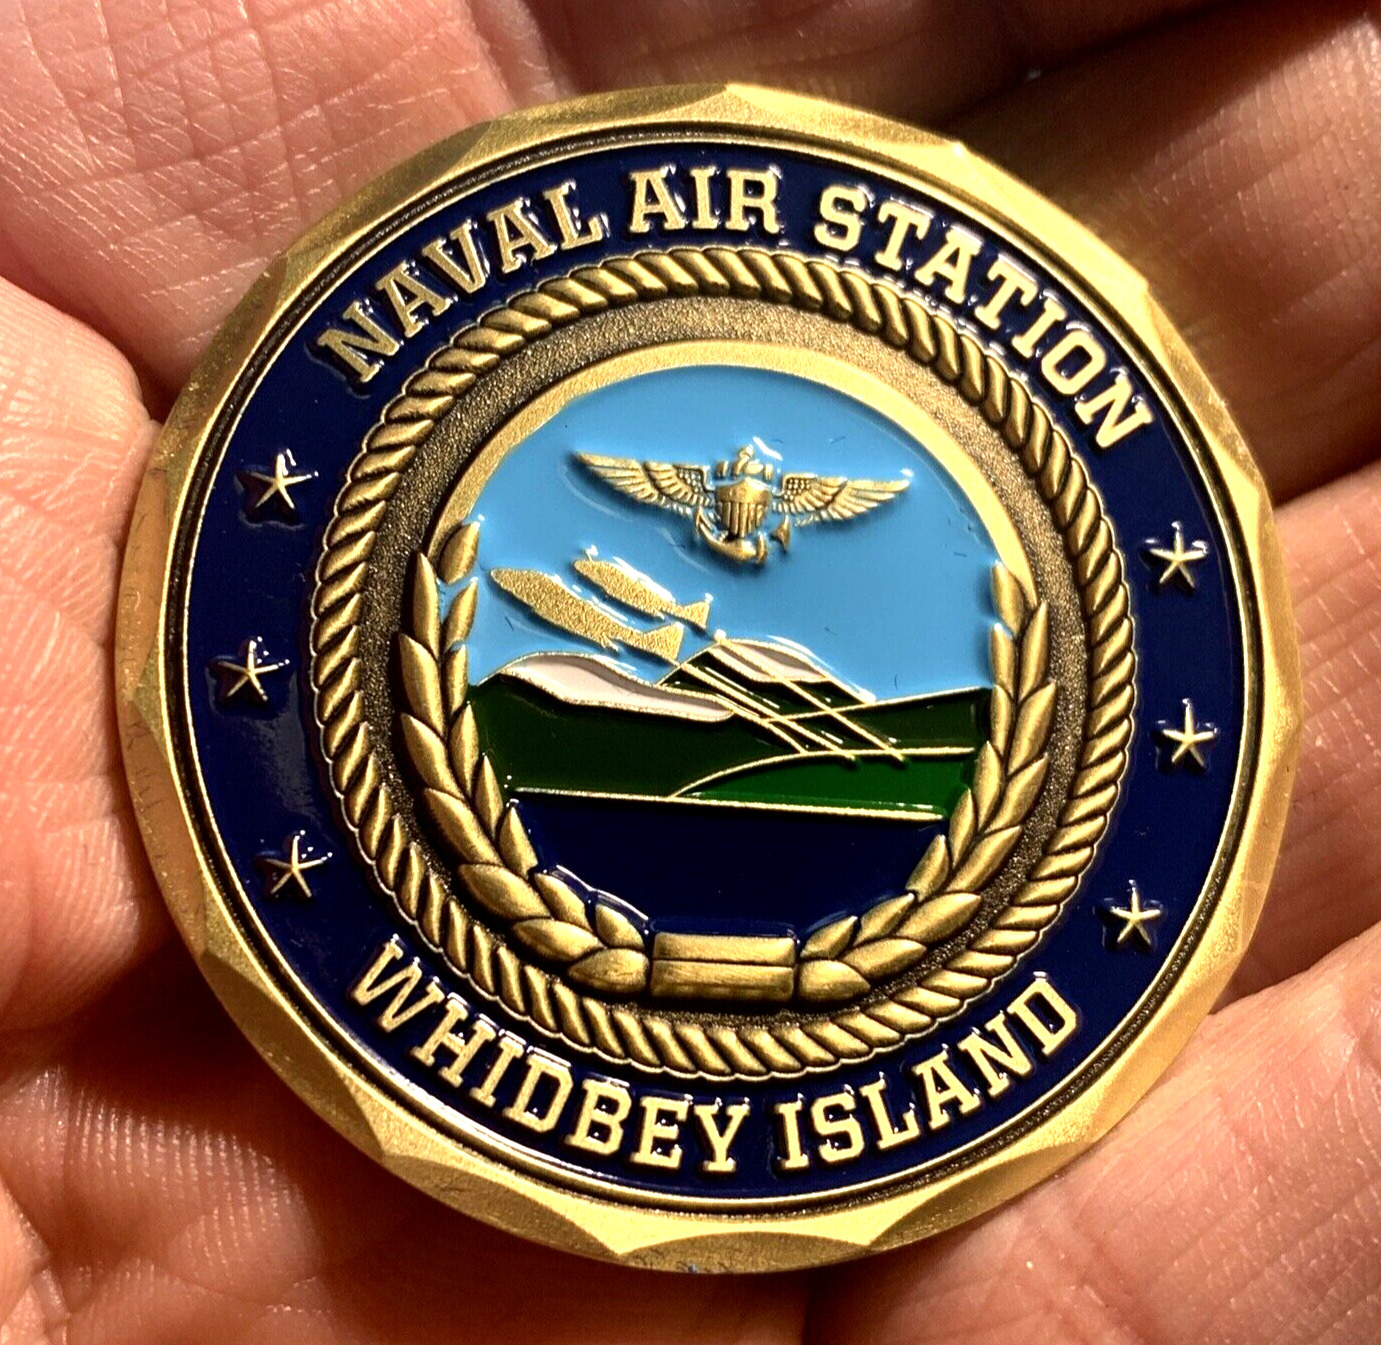 NAVAL AIR STATION NAS WHIDBEY ISLAND Challenge Coin 1.75